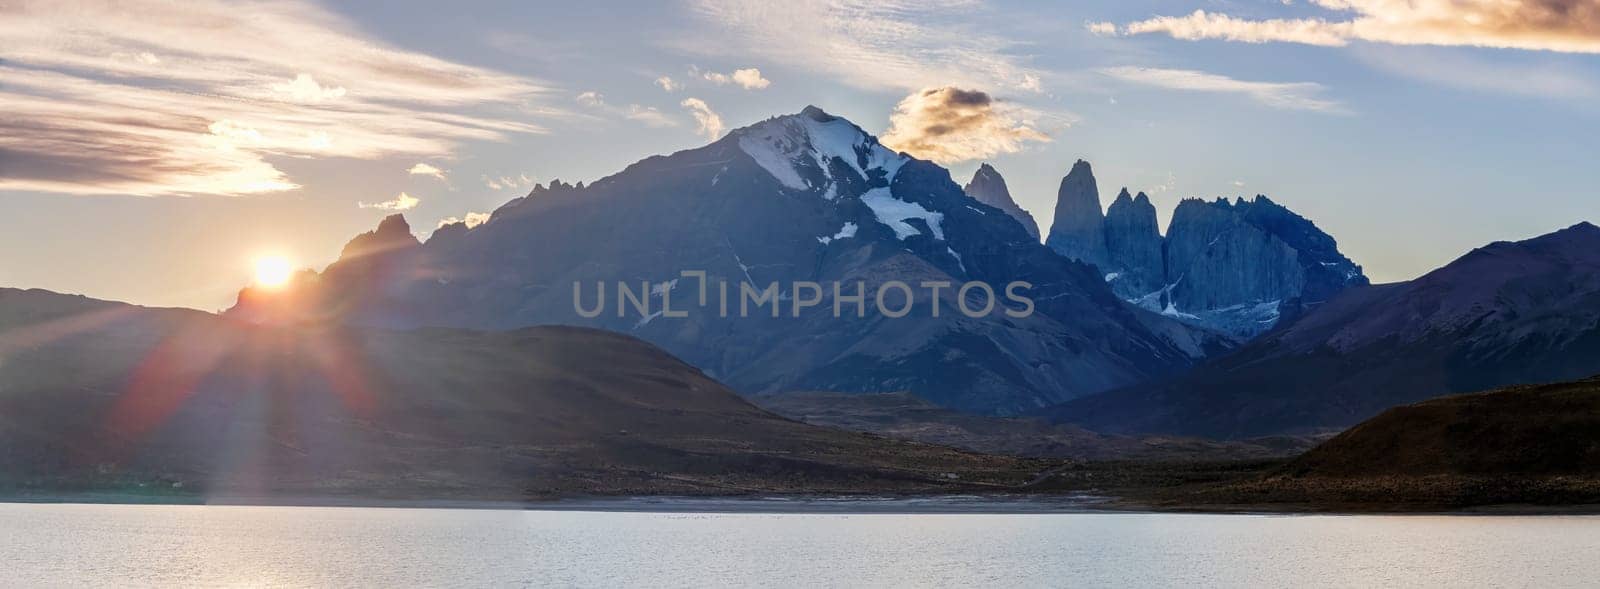 Majestic Sunrise over Patagonian Mountains and Lake by FerradalFCG